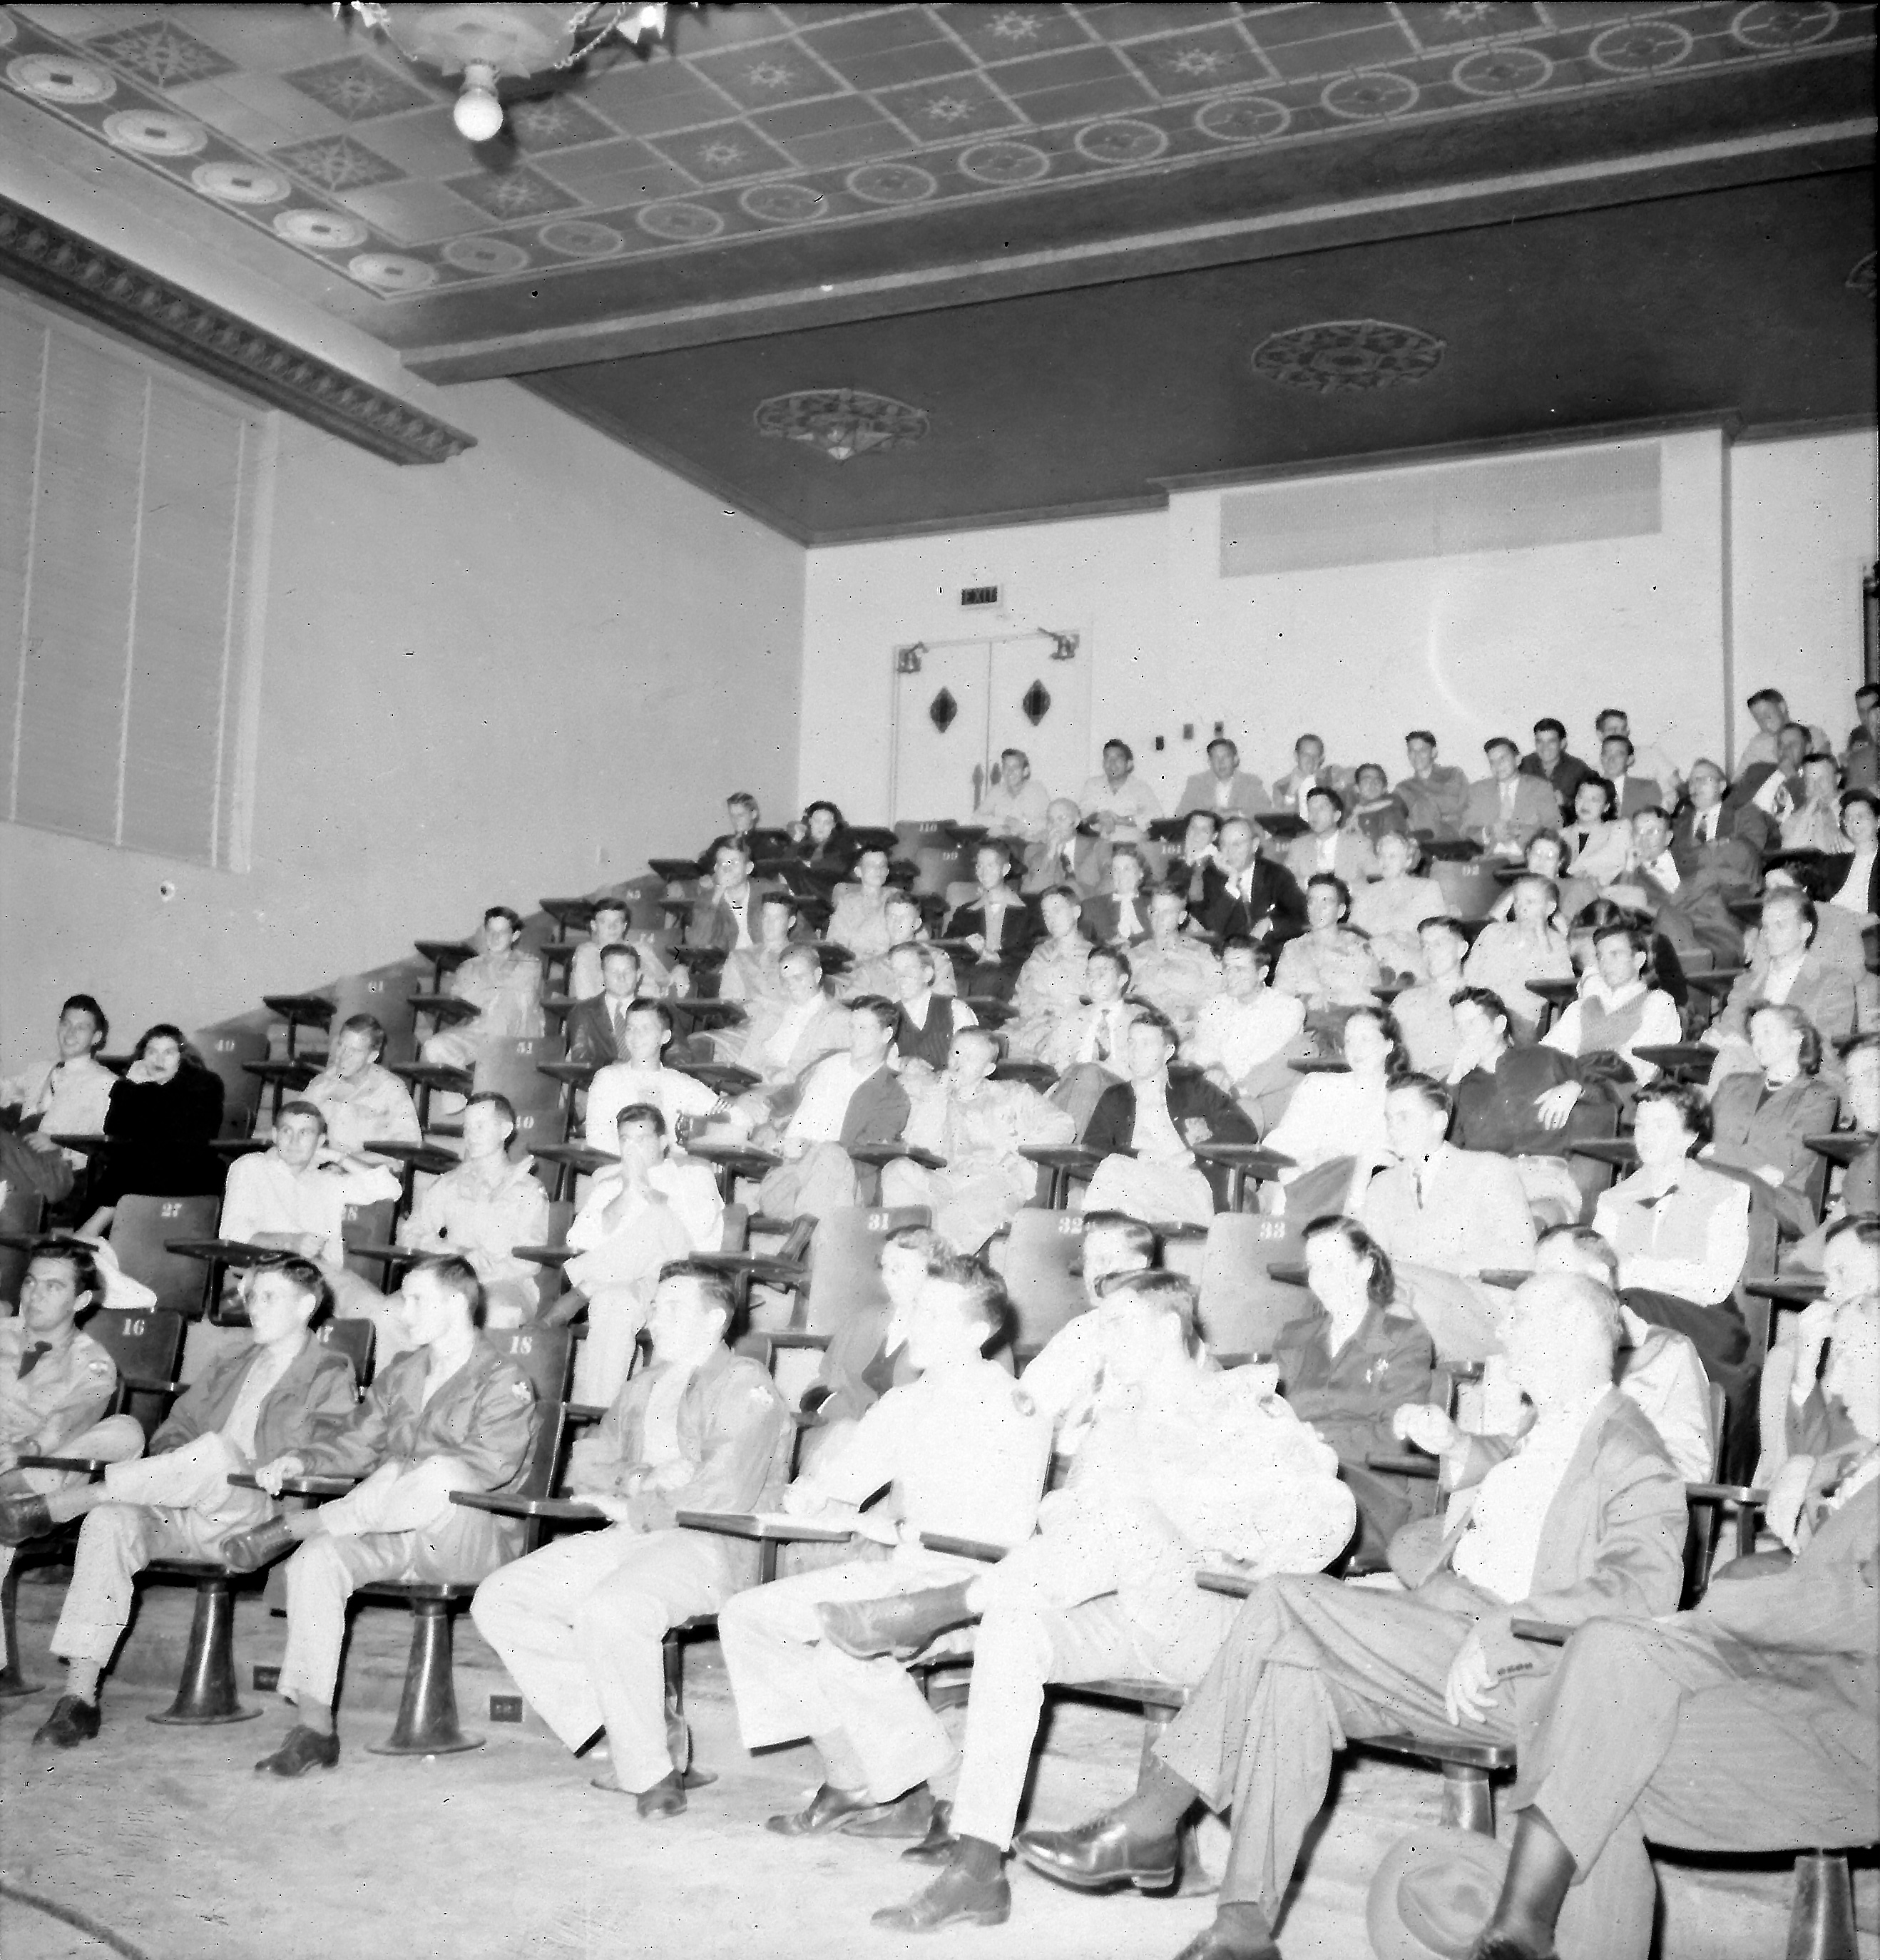 This 1949 view of the lecture hall shows the original stenciled ceiling that was subsequently painted over and hidden behind a suspended ceiling.  Our renovation efforts will bring back the multi-colored stenciling for modern students to admire.